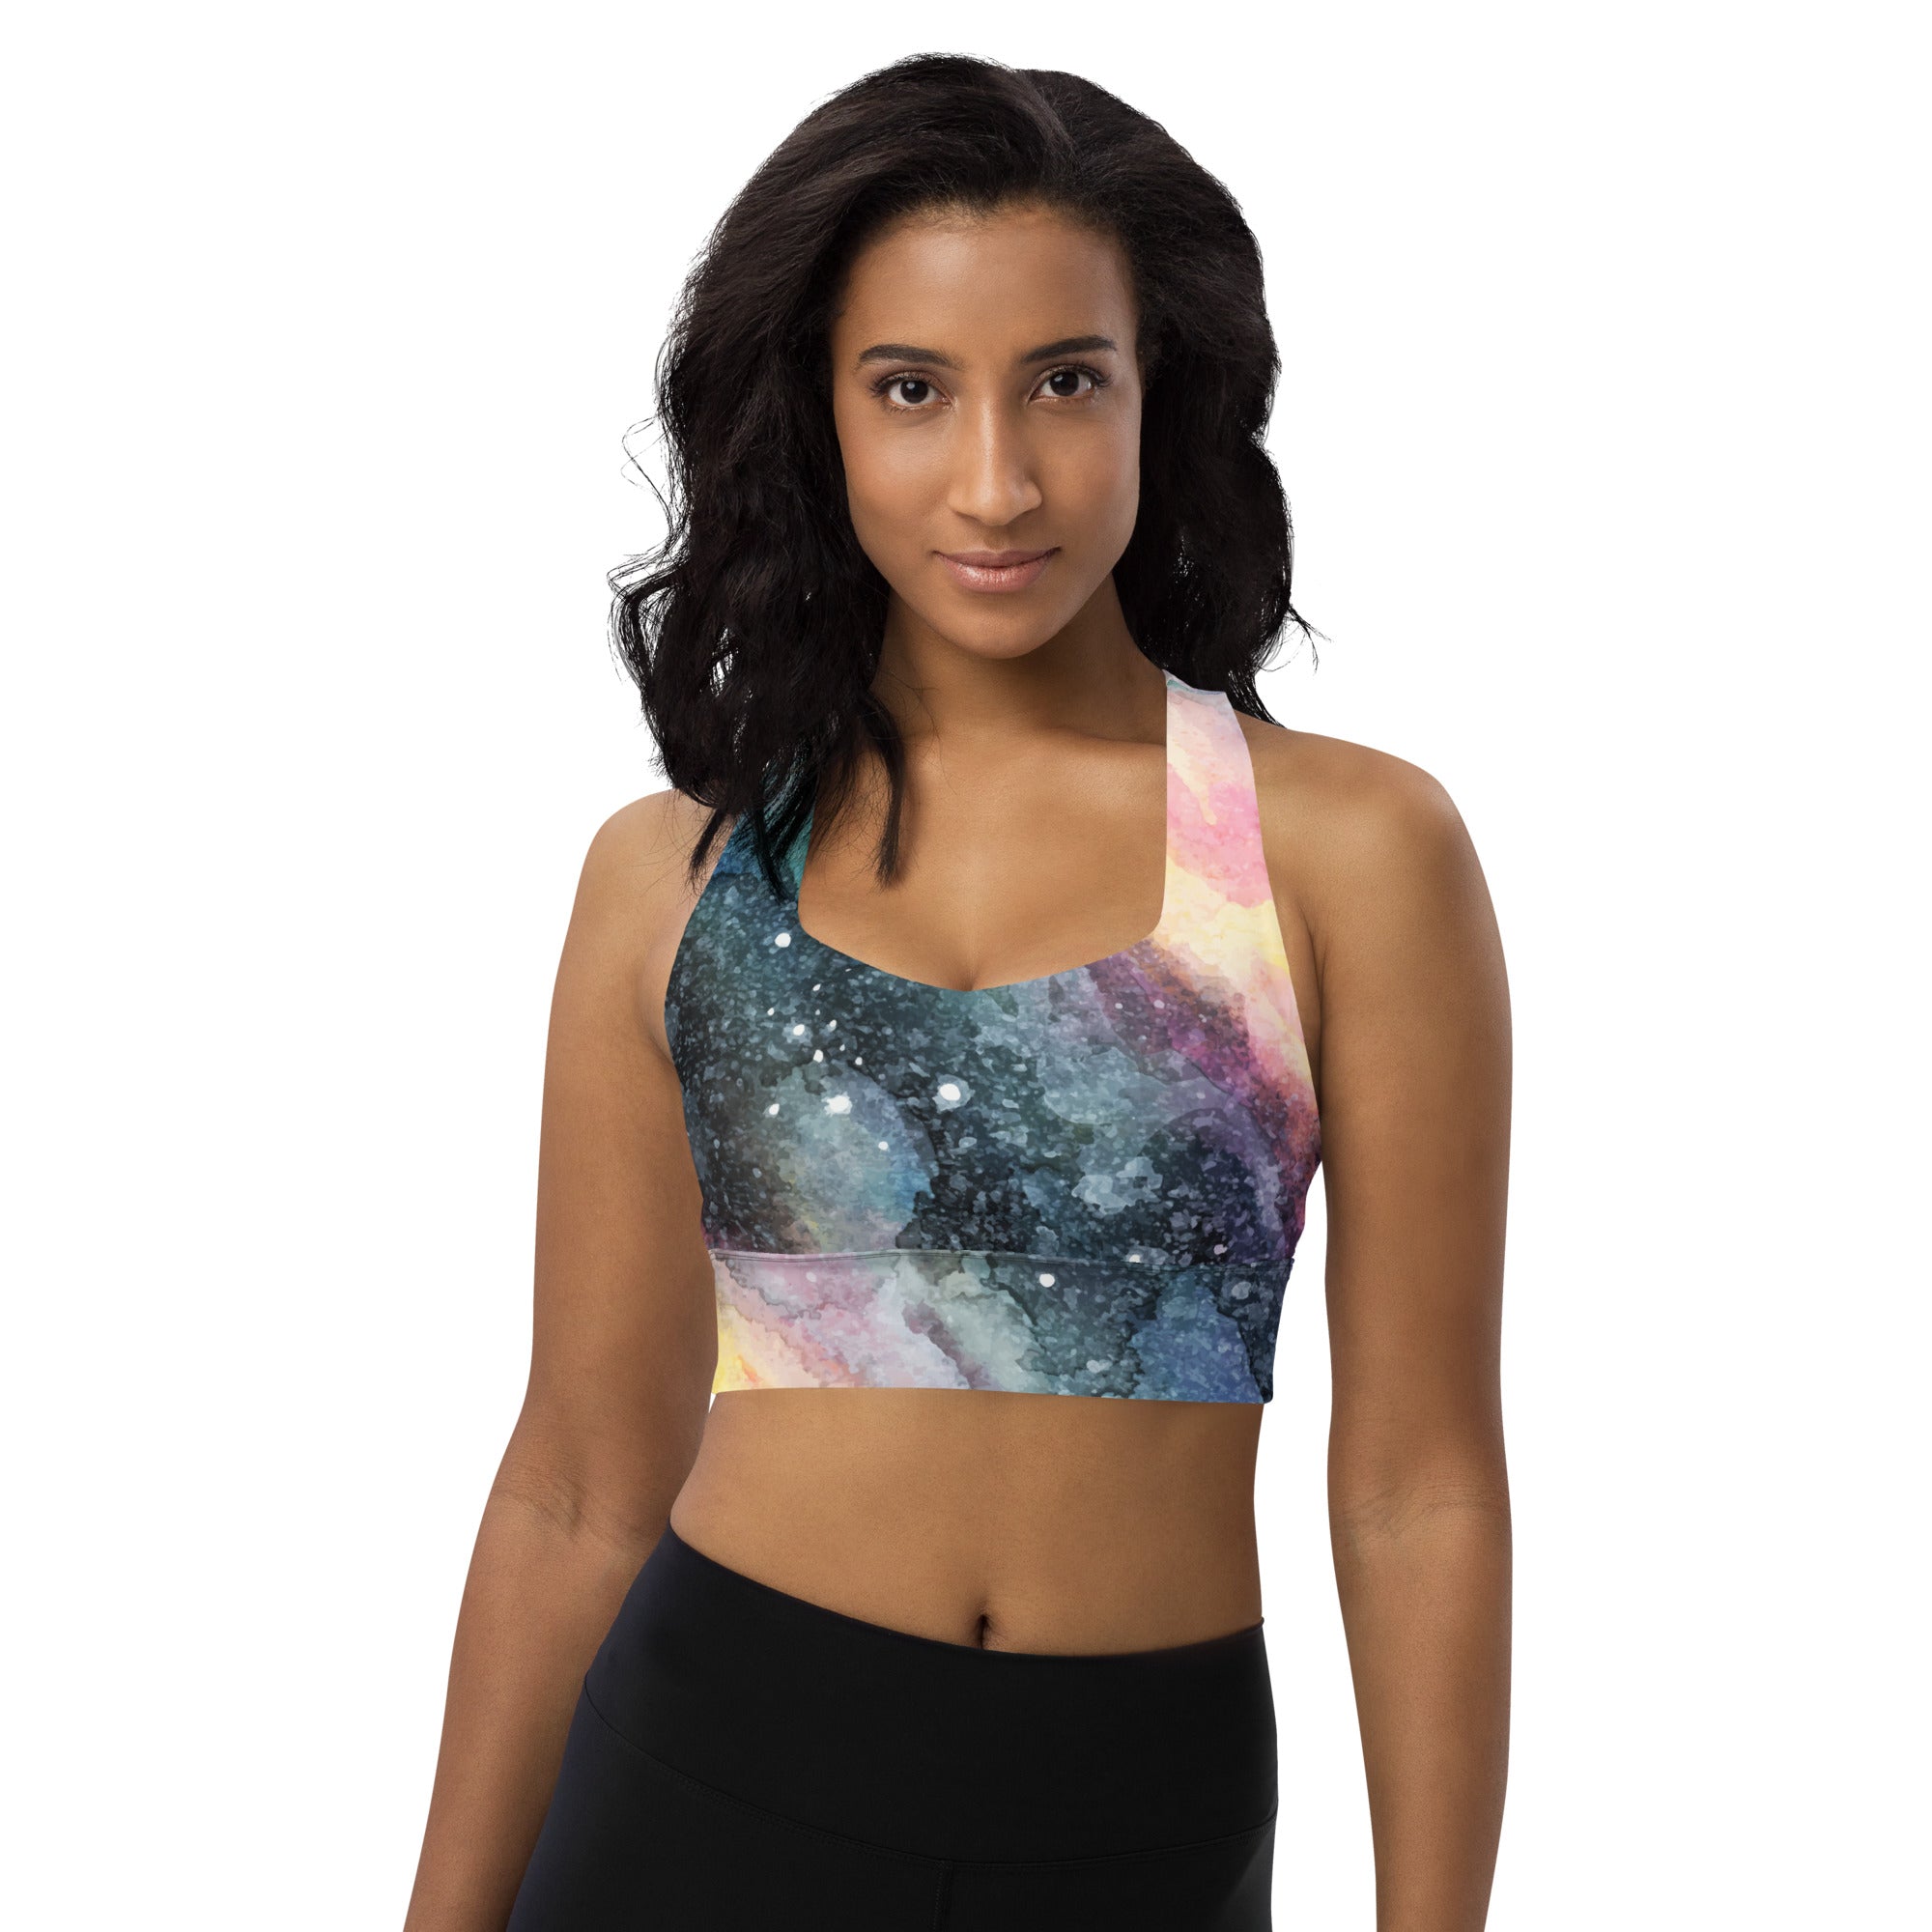 Professional Women's Sports Bra, Breathable and Quick Dry, Neon Colors –  Stars and Stripes Design – Your Megastore